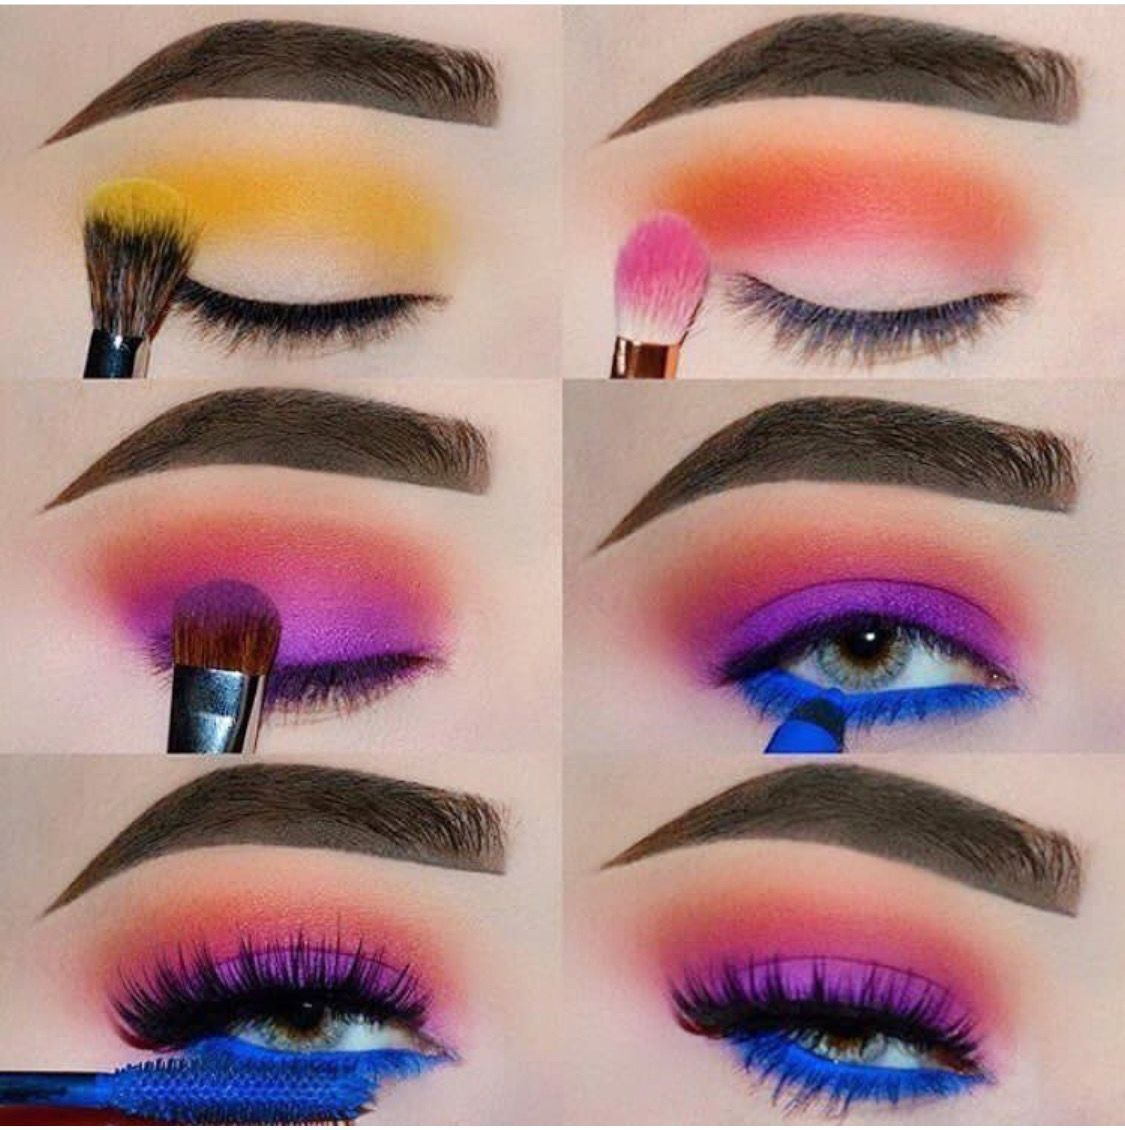 Easy Eye Makeup Colorful Eye Shadow Makeup Tutorial Super Easy To Follow With This